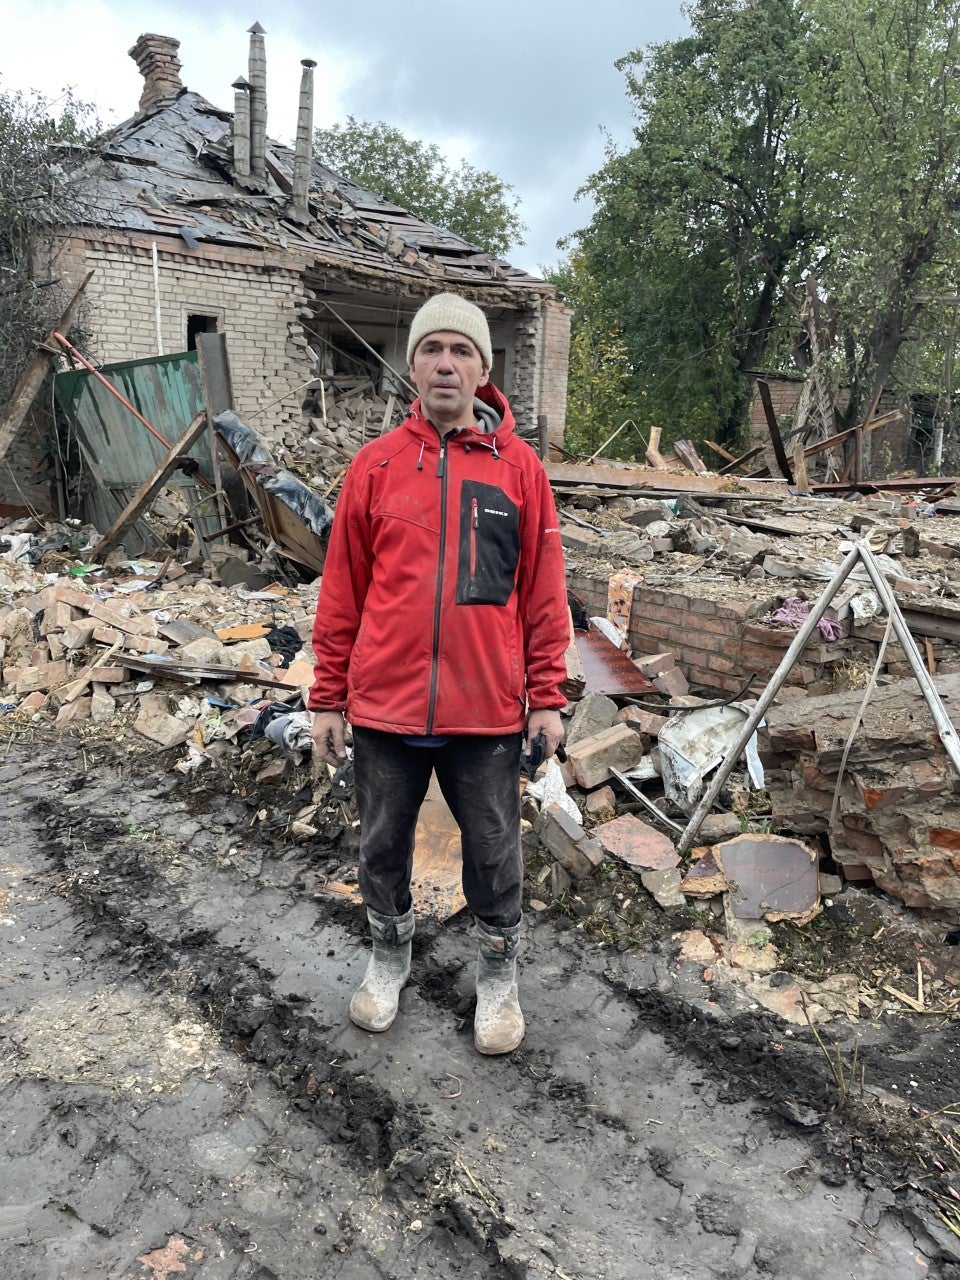 Vladimir Chumak outside the rubble of his house in Slovyansk after a Russian missile attack in which his sister-in-law Zoya was killed